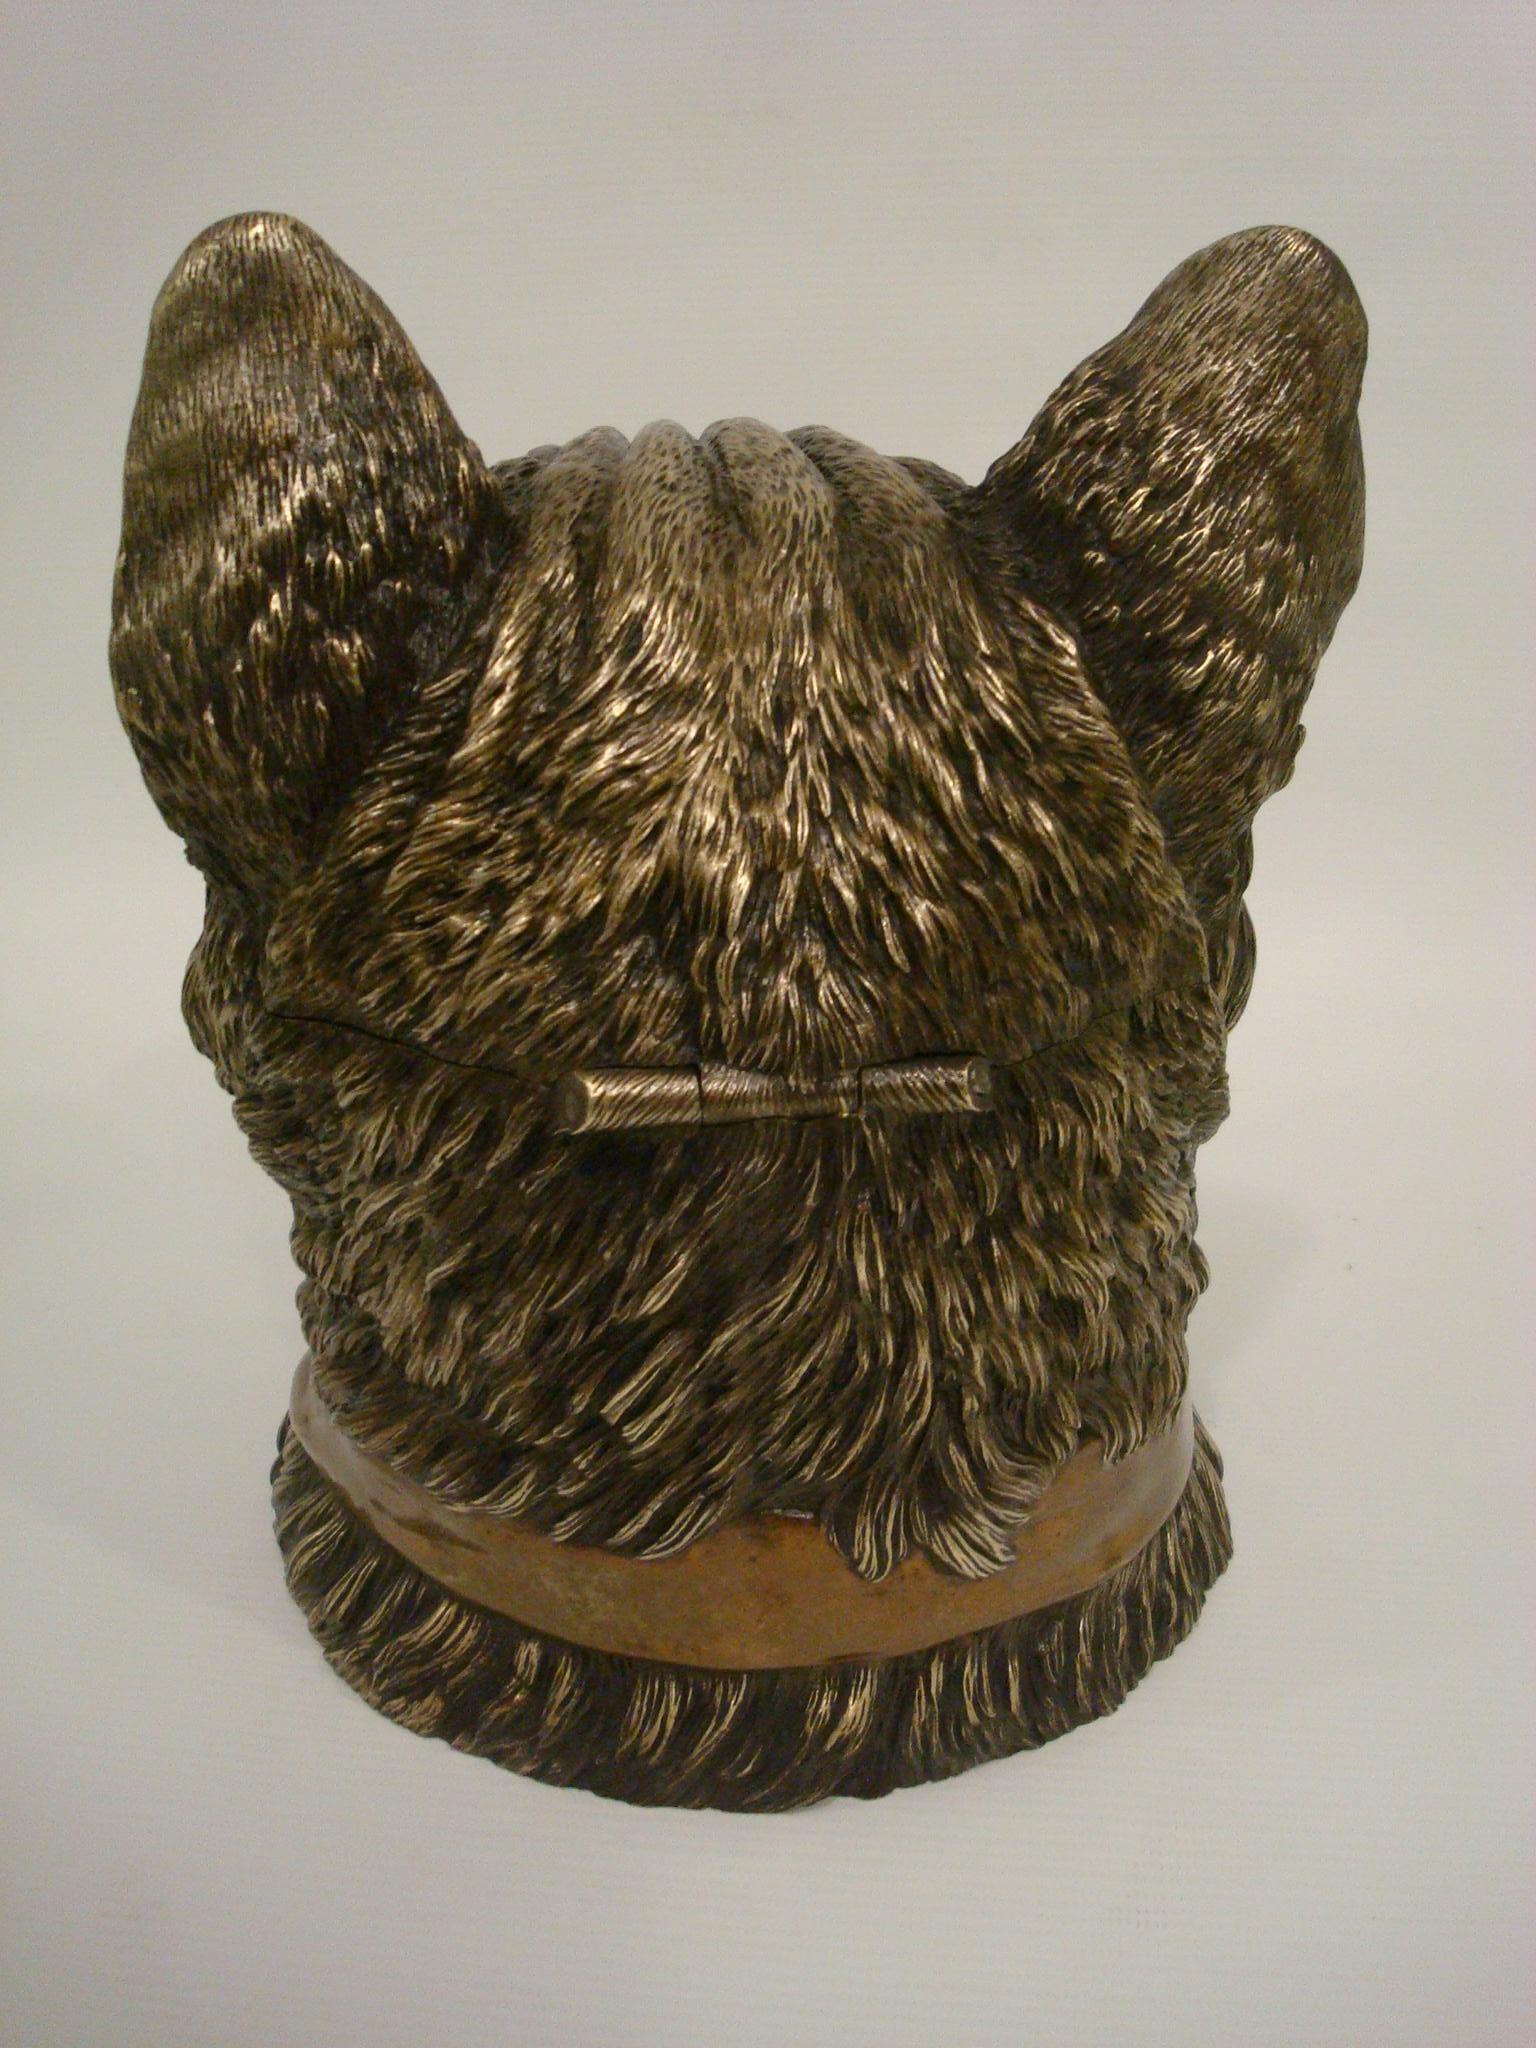 Novelty Bronze Cigars / Cigarettes Humidor Formed as a Cat's Head Sculpture For Sale 6